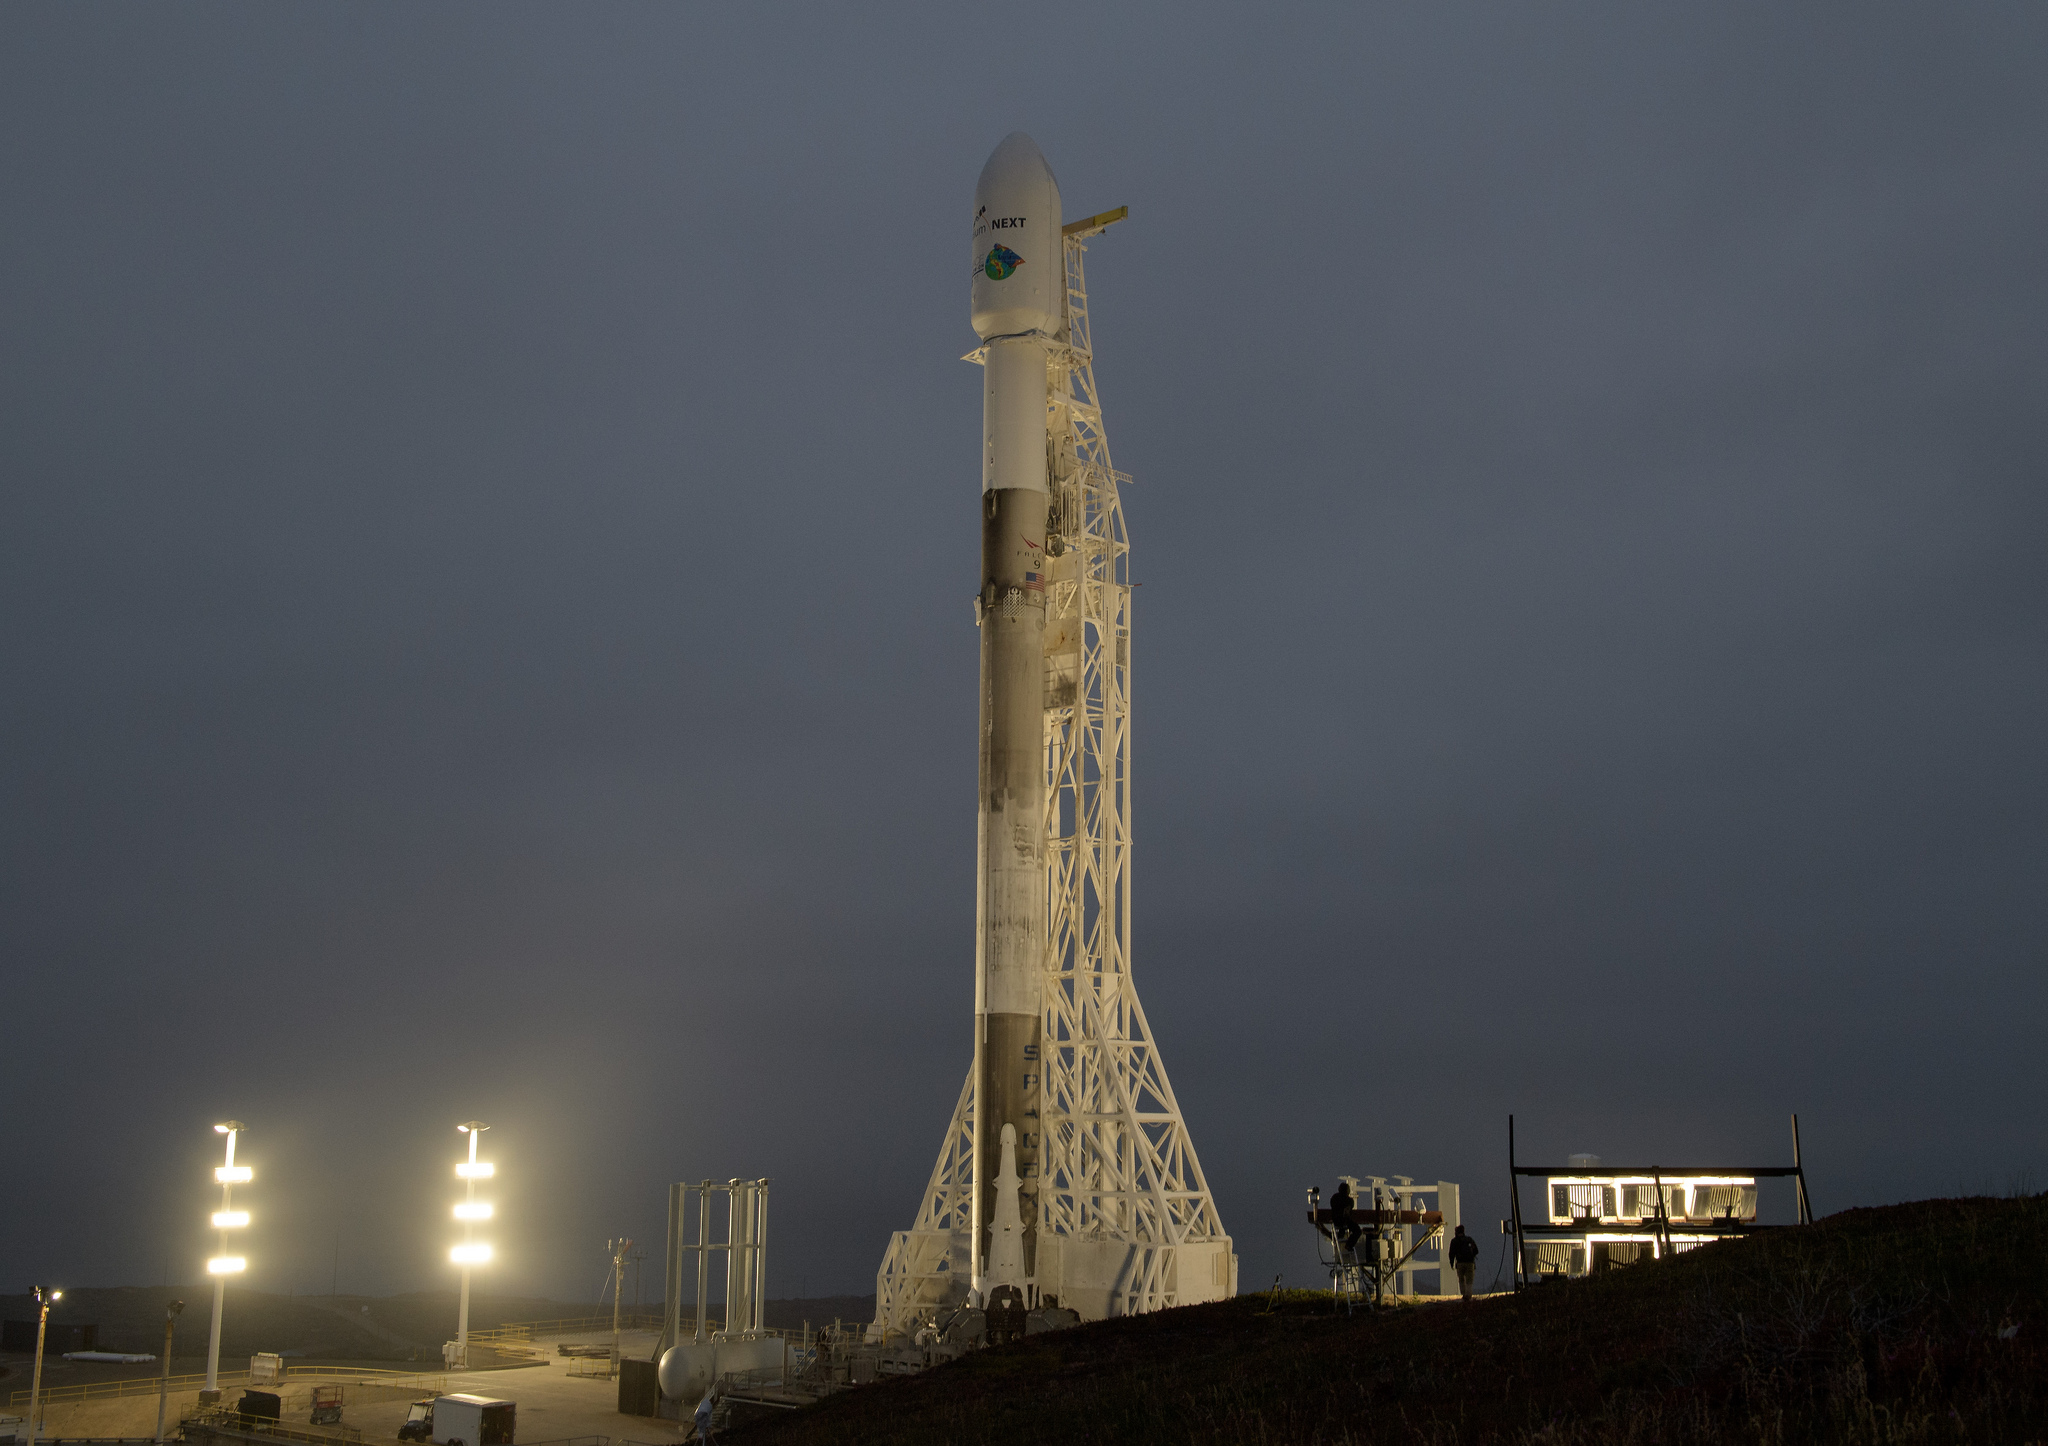 GRACE-FO sits in the fairing of the SpaceX Falcon 9 rocket.